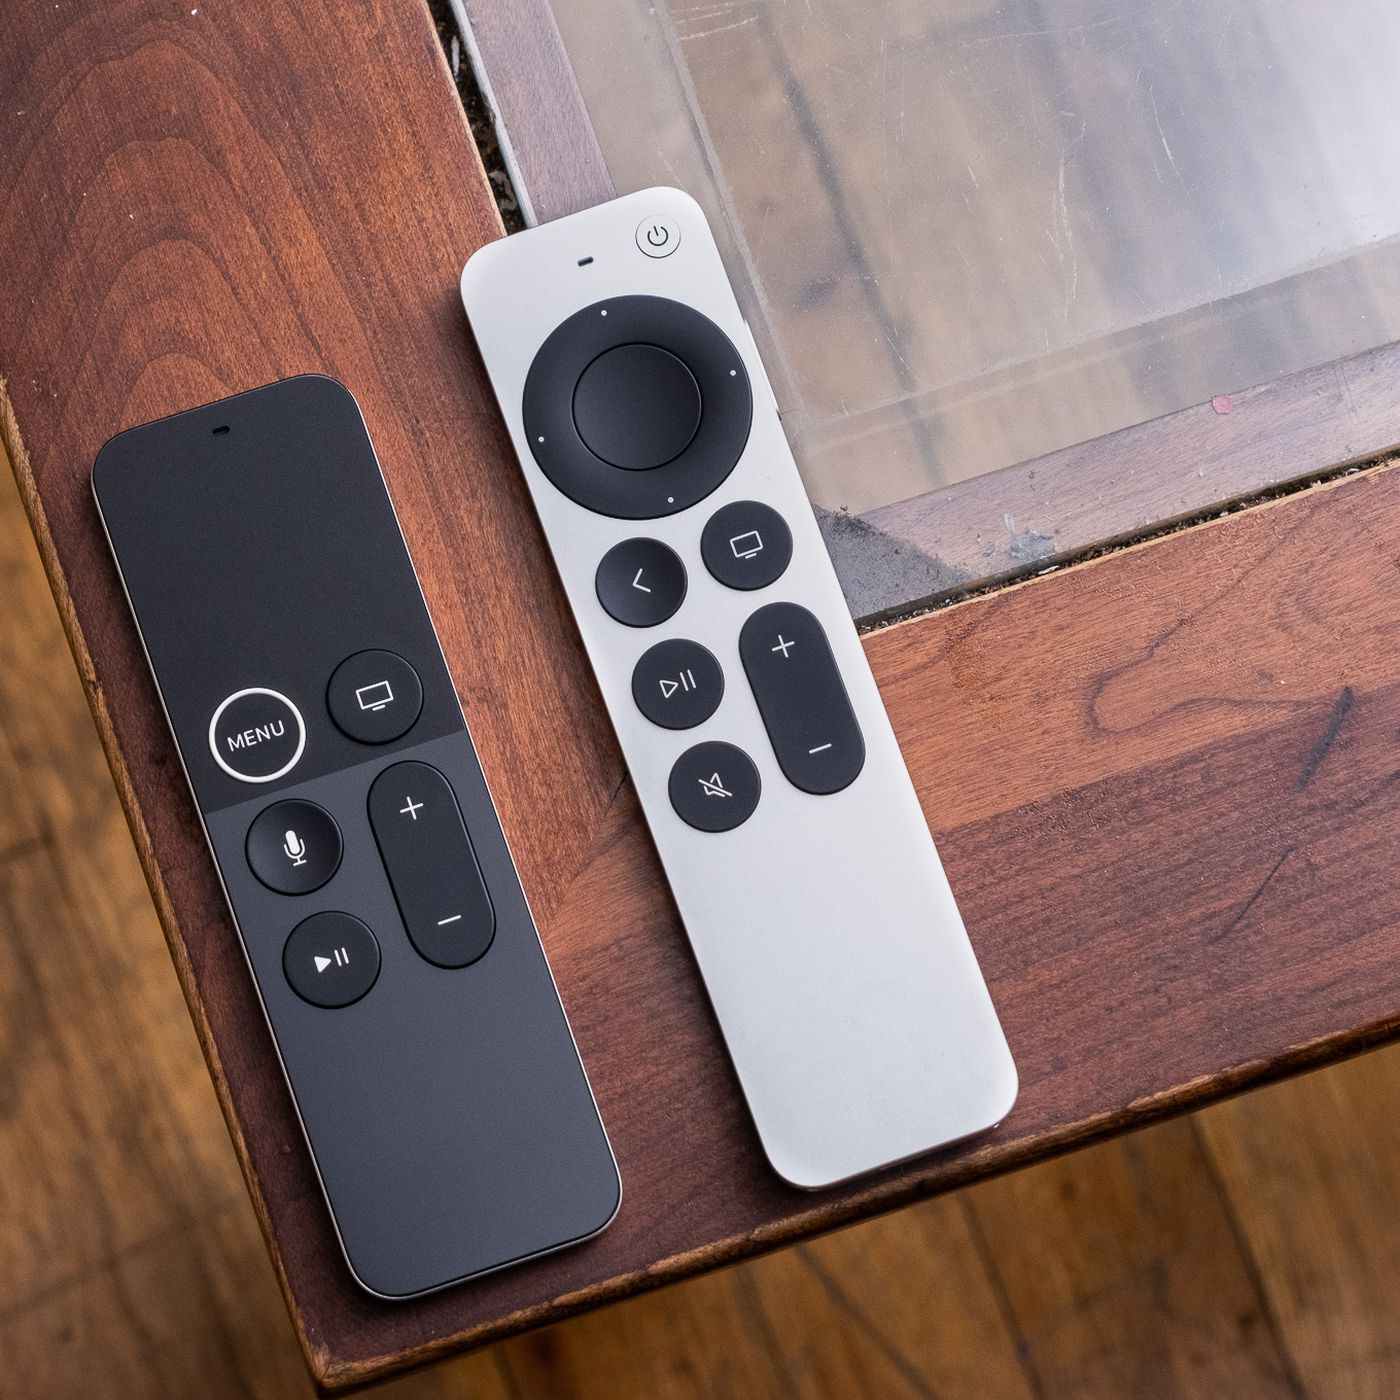 Apple TV Siri Remote review: pushing all the right buttons - The Verge